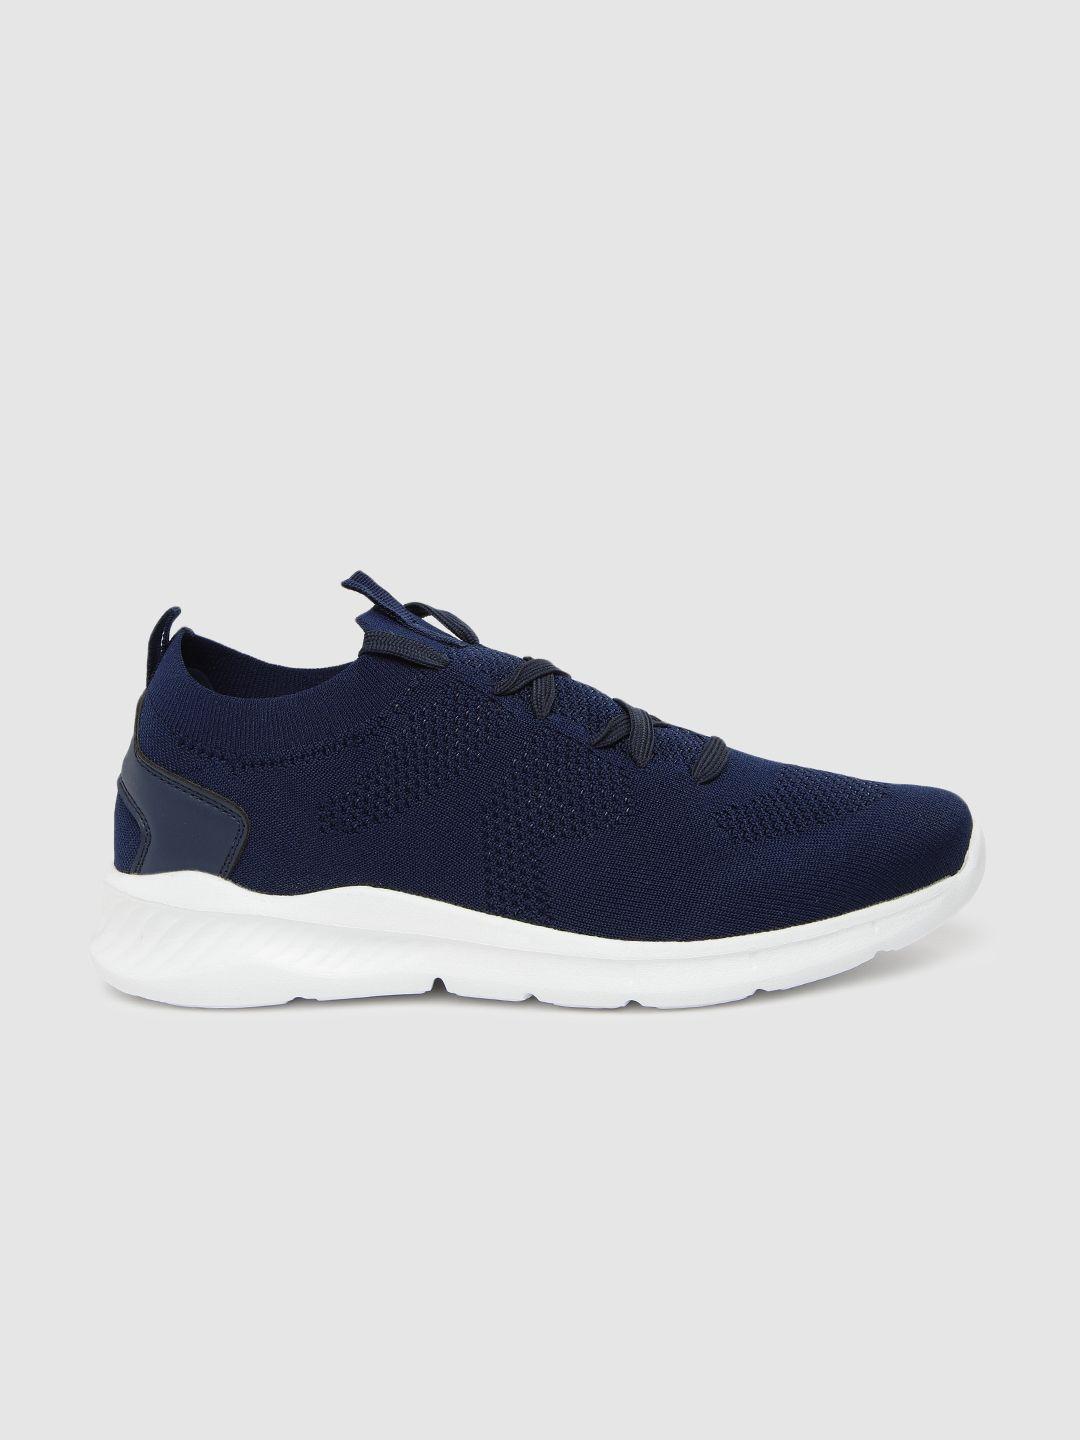 the roadster lifestyle co men navy blue sneakers